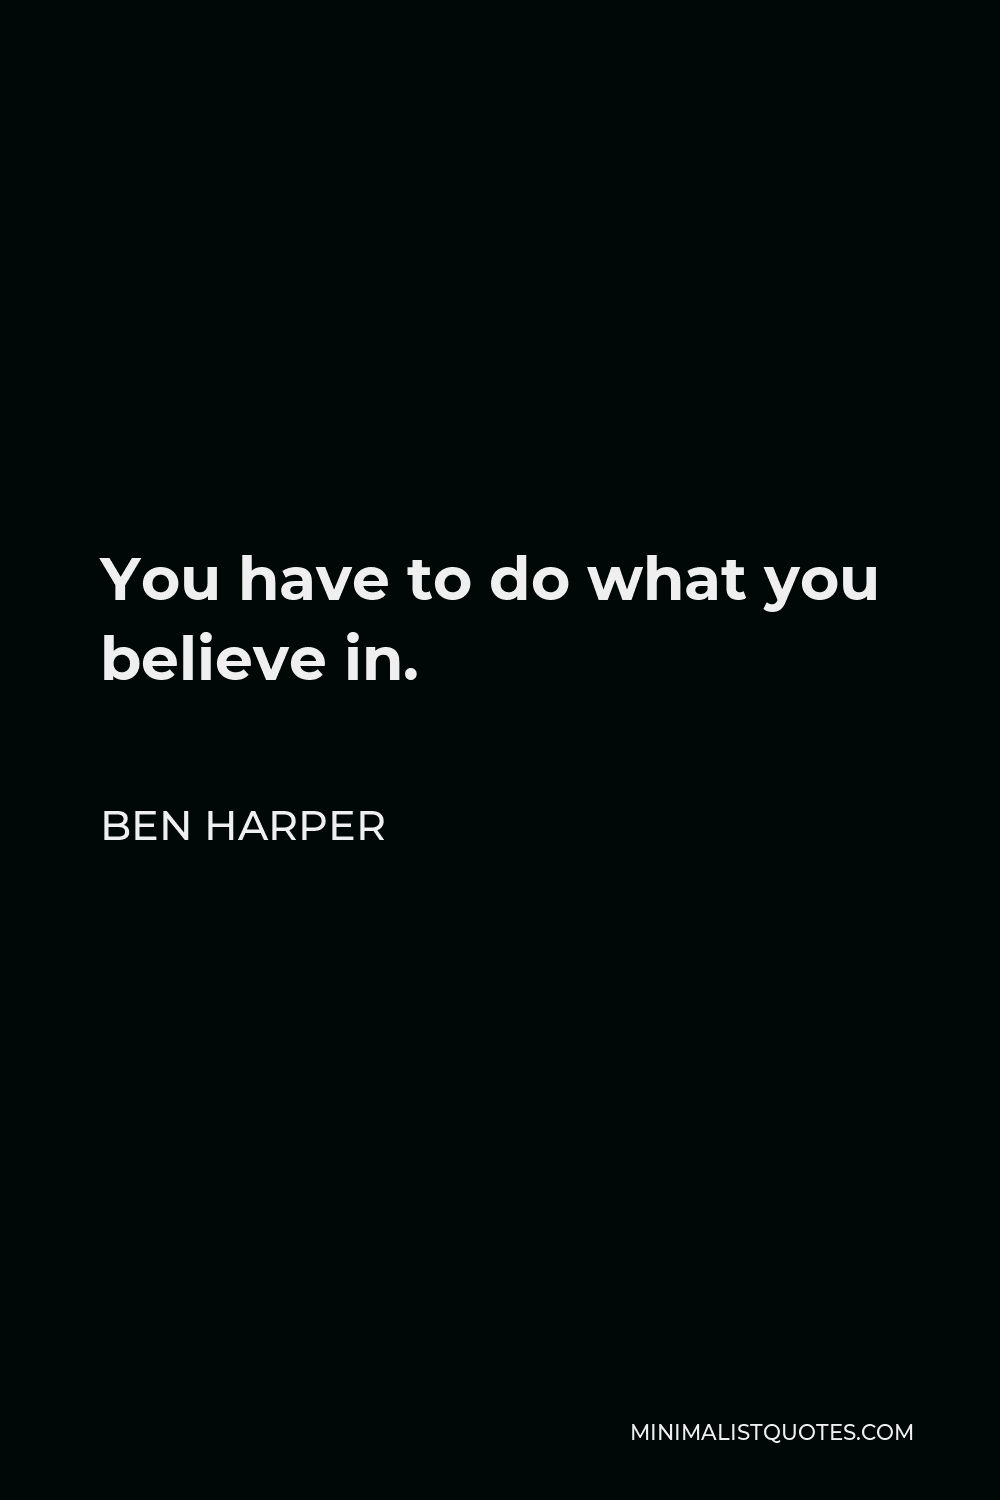 Ben Harper Quote - You have to do what you believe in.